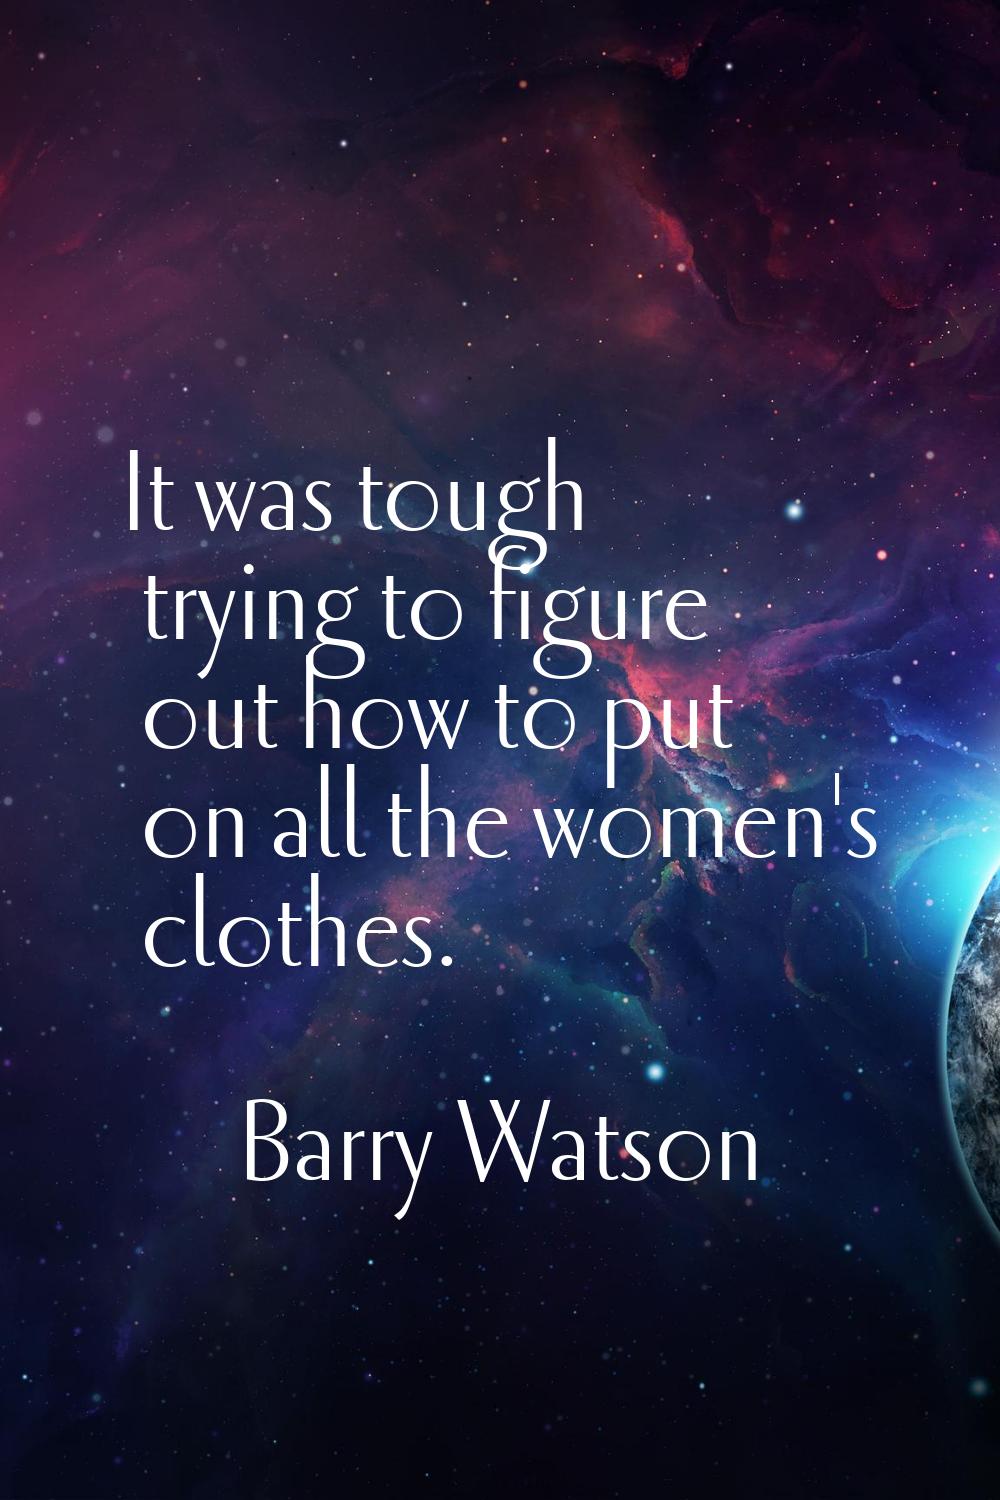 It was tough trying to figure out how to put on all the women's clothes.